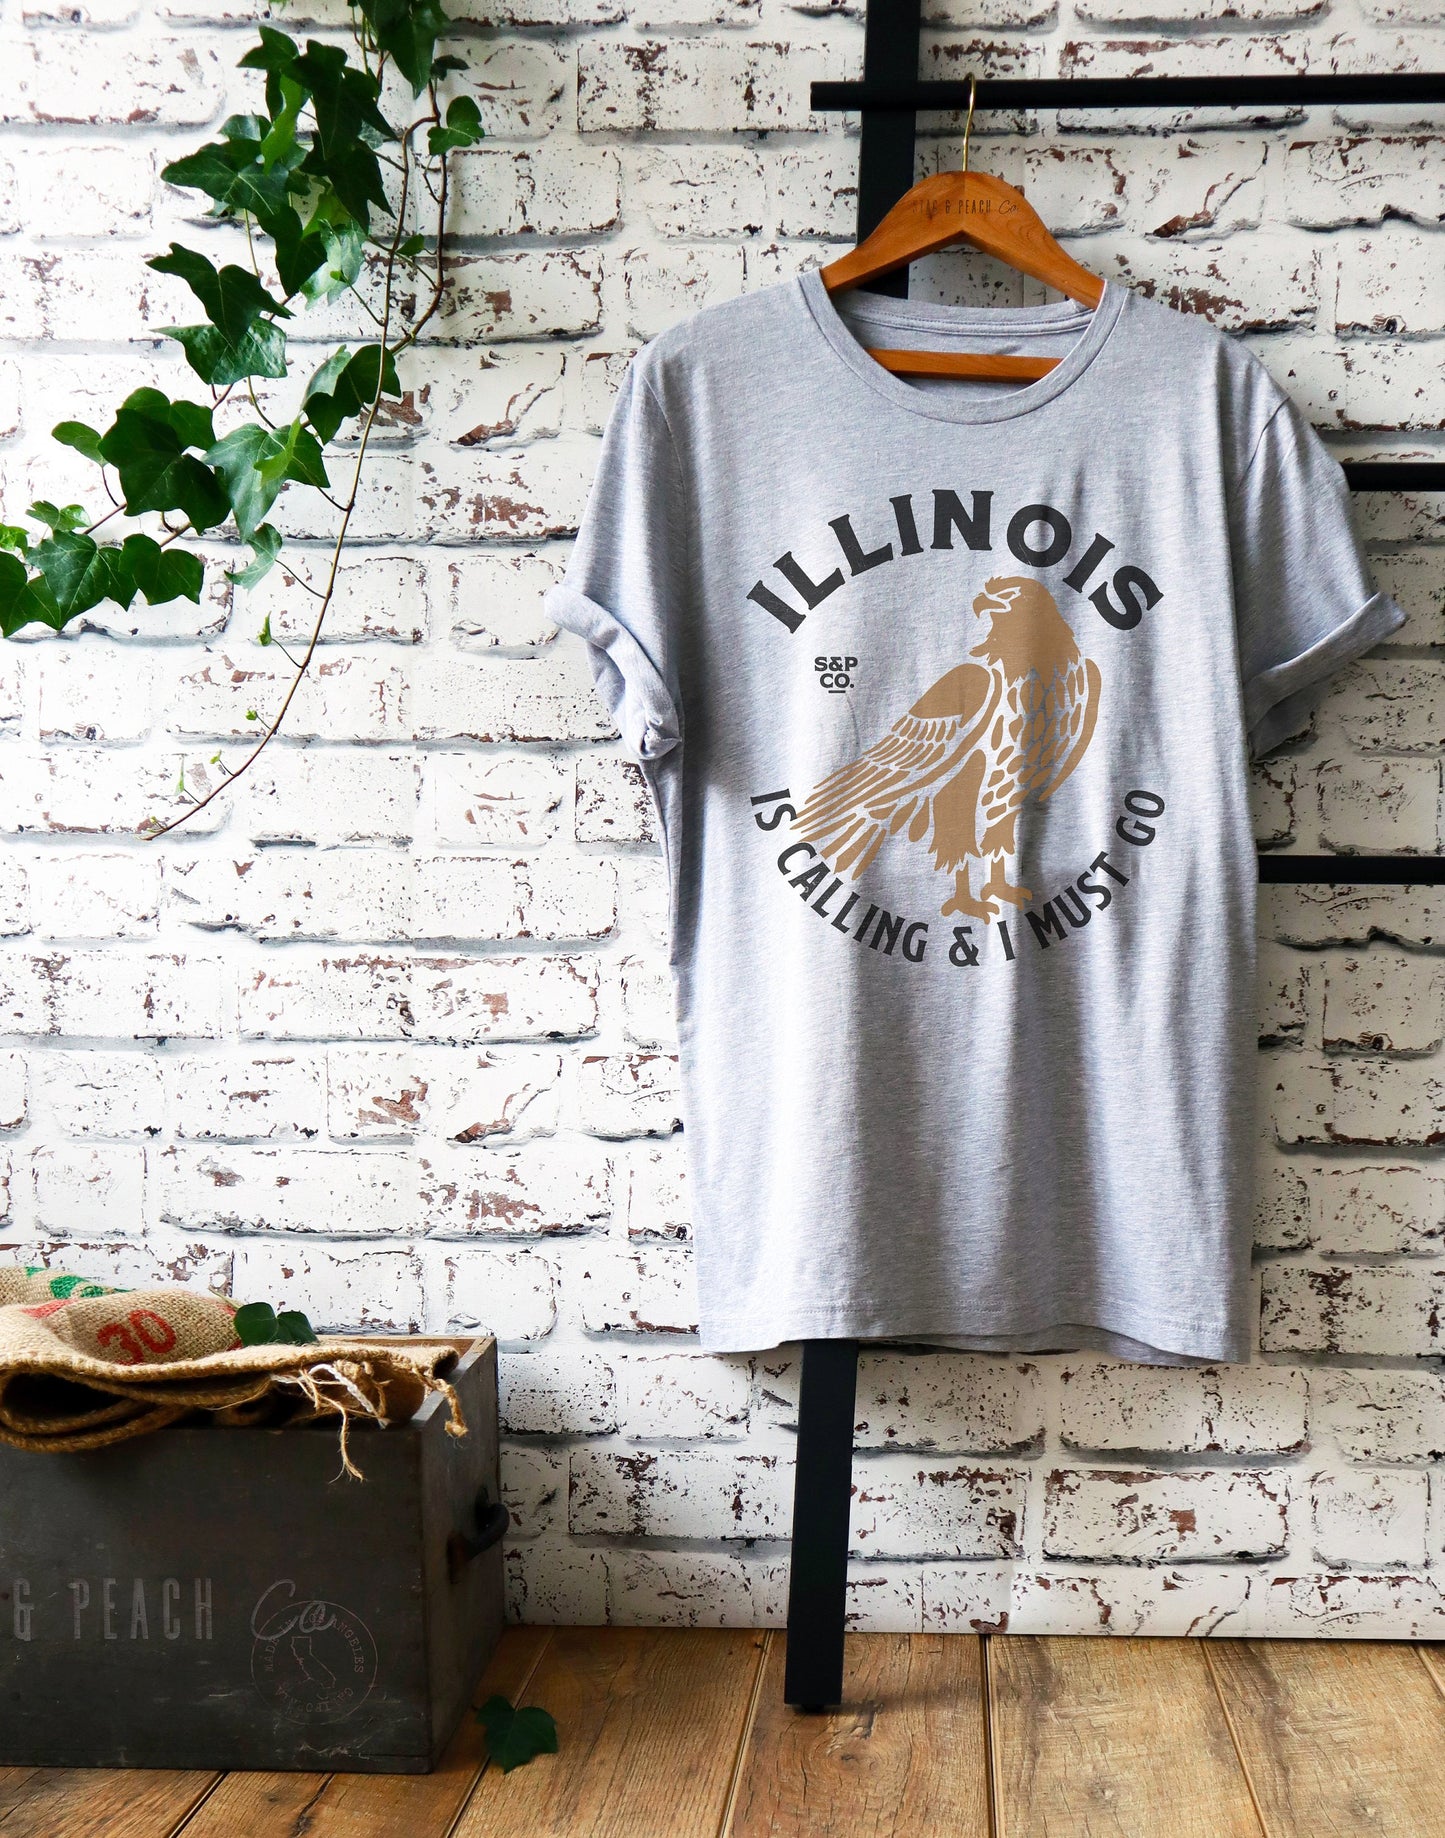 Illinois Unisex Shirt - Illinois Is Calling & I Must Go, Chicago Gift, Eagle Shirt, Prairie State T-Shirt, IL Home Tee, College Shirt